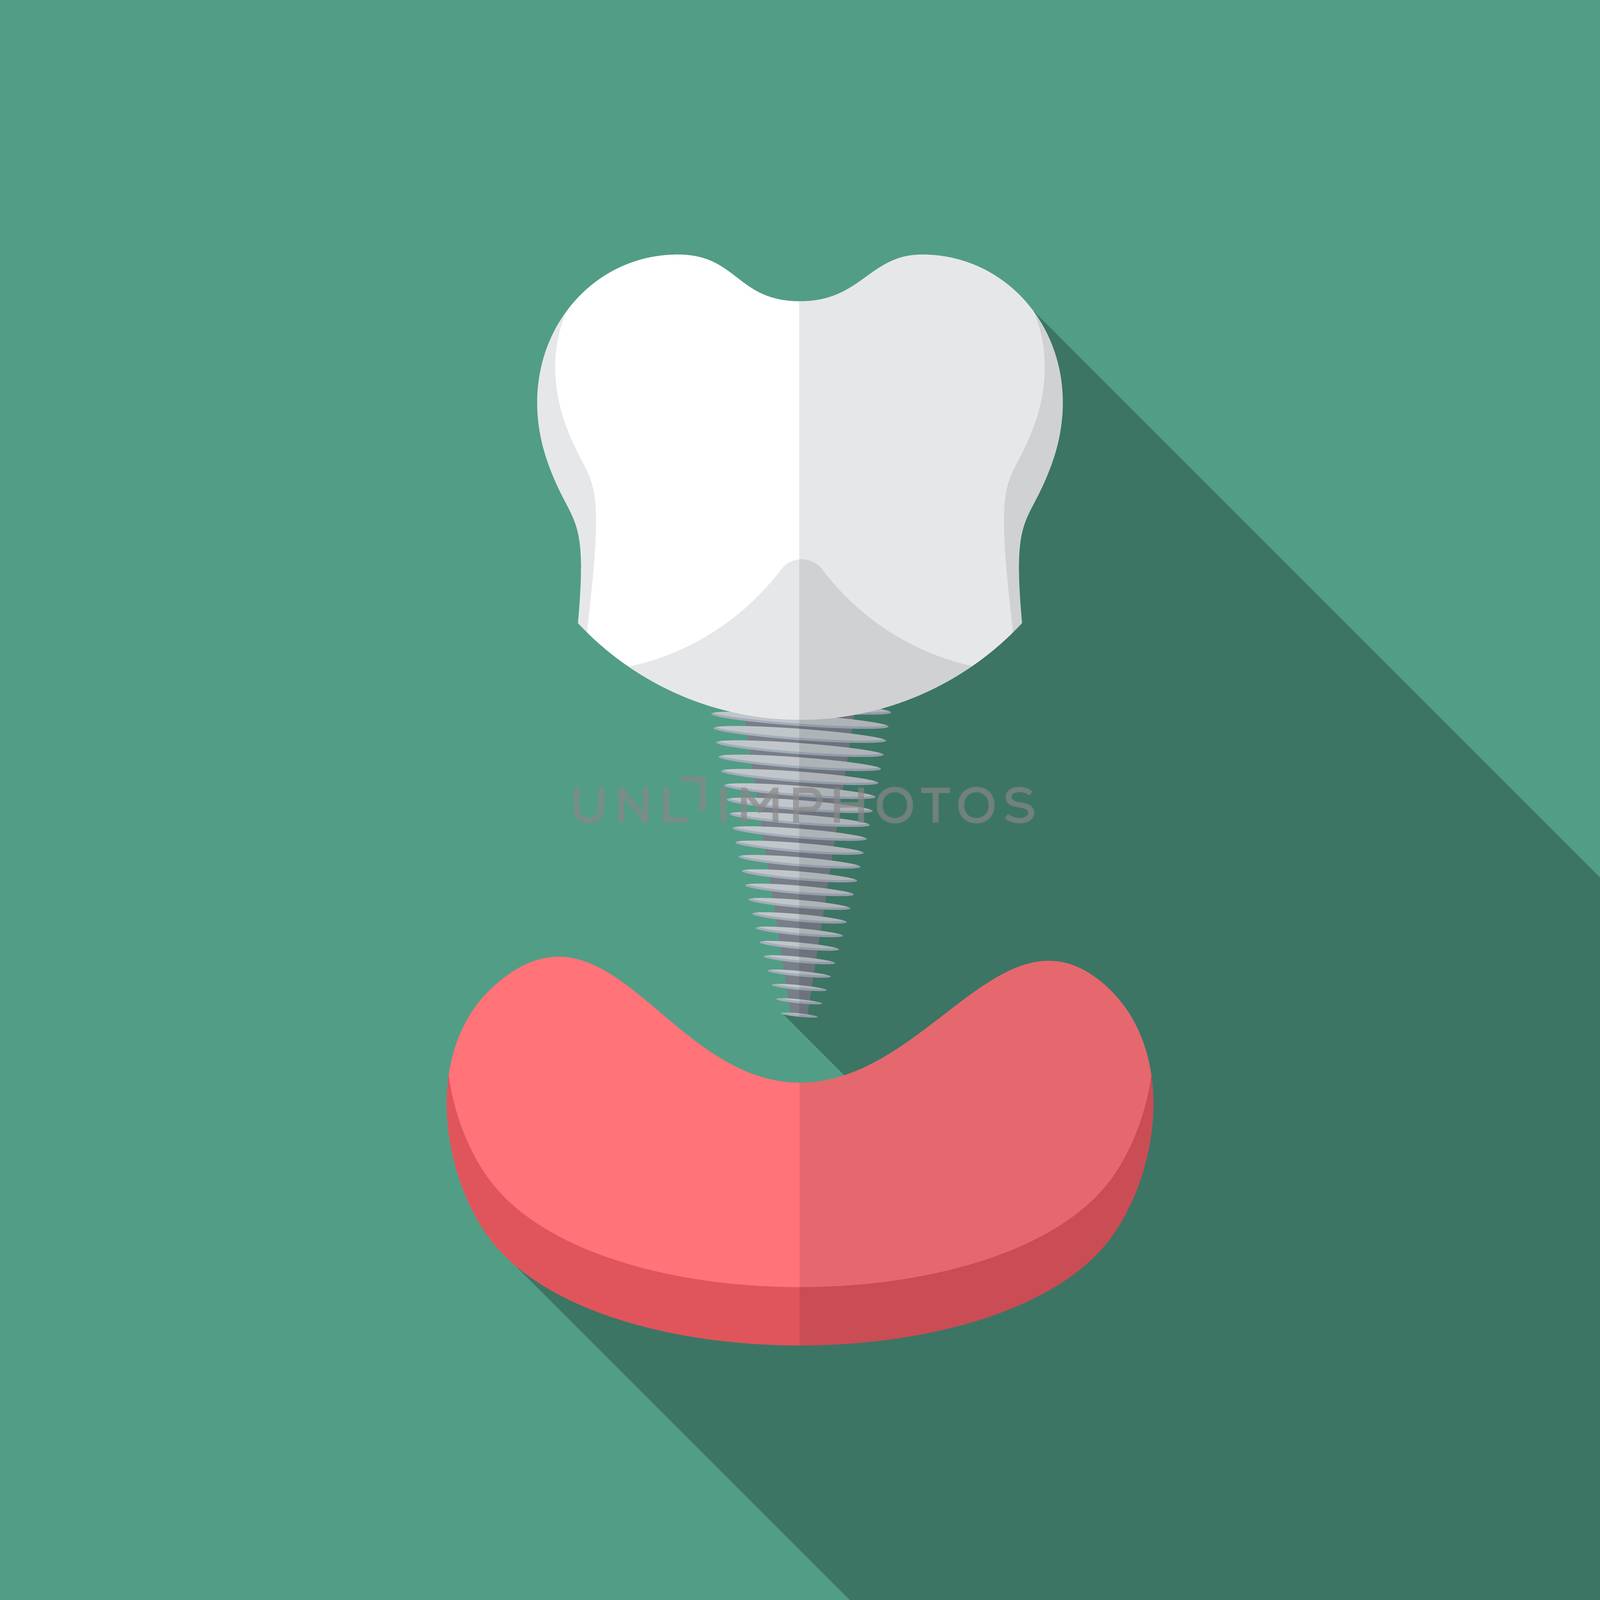 Flat design modern vector illustration of tooth implant icon with long shadow by Lemon_workshop